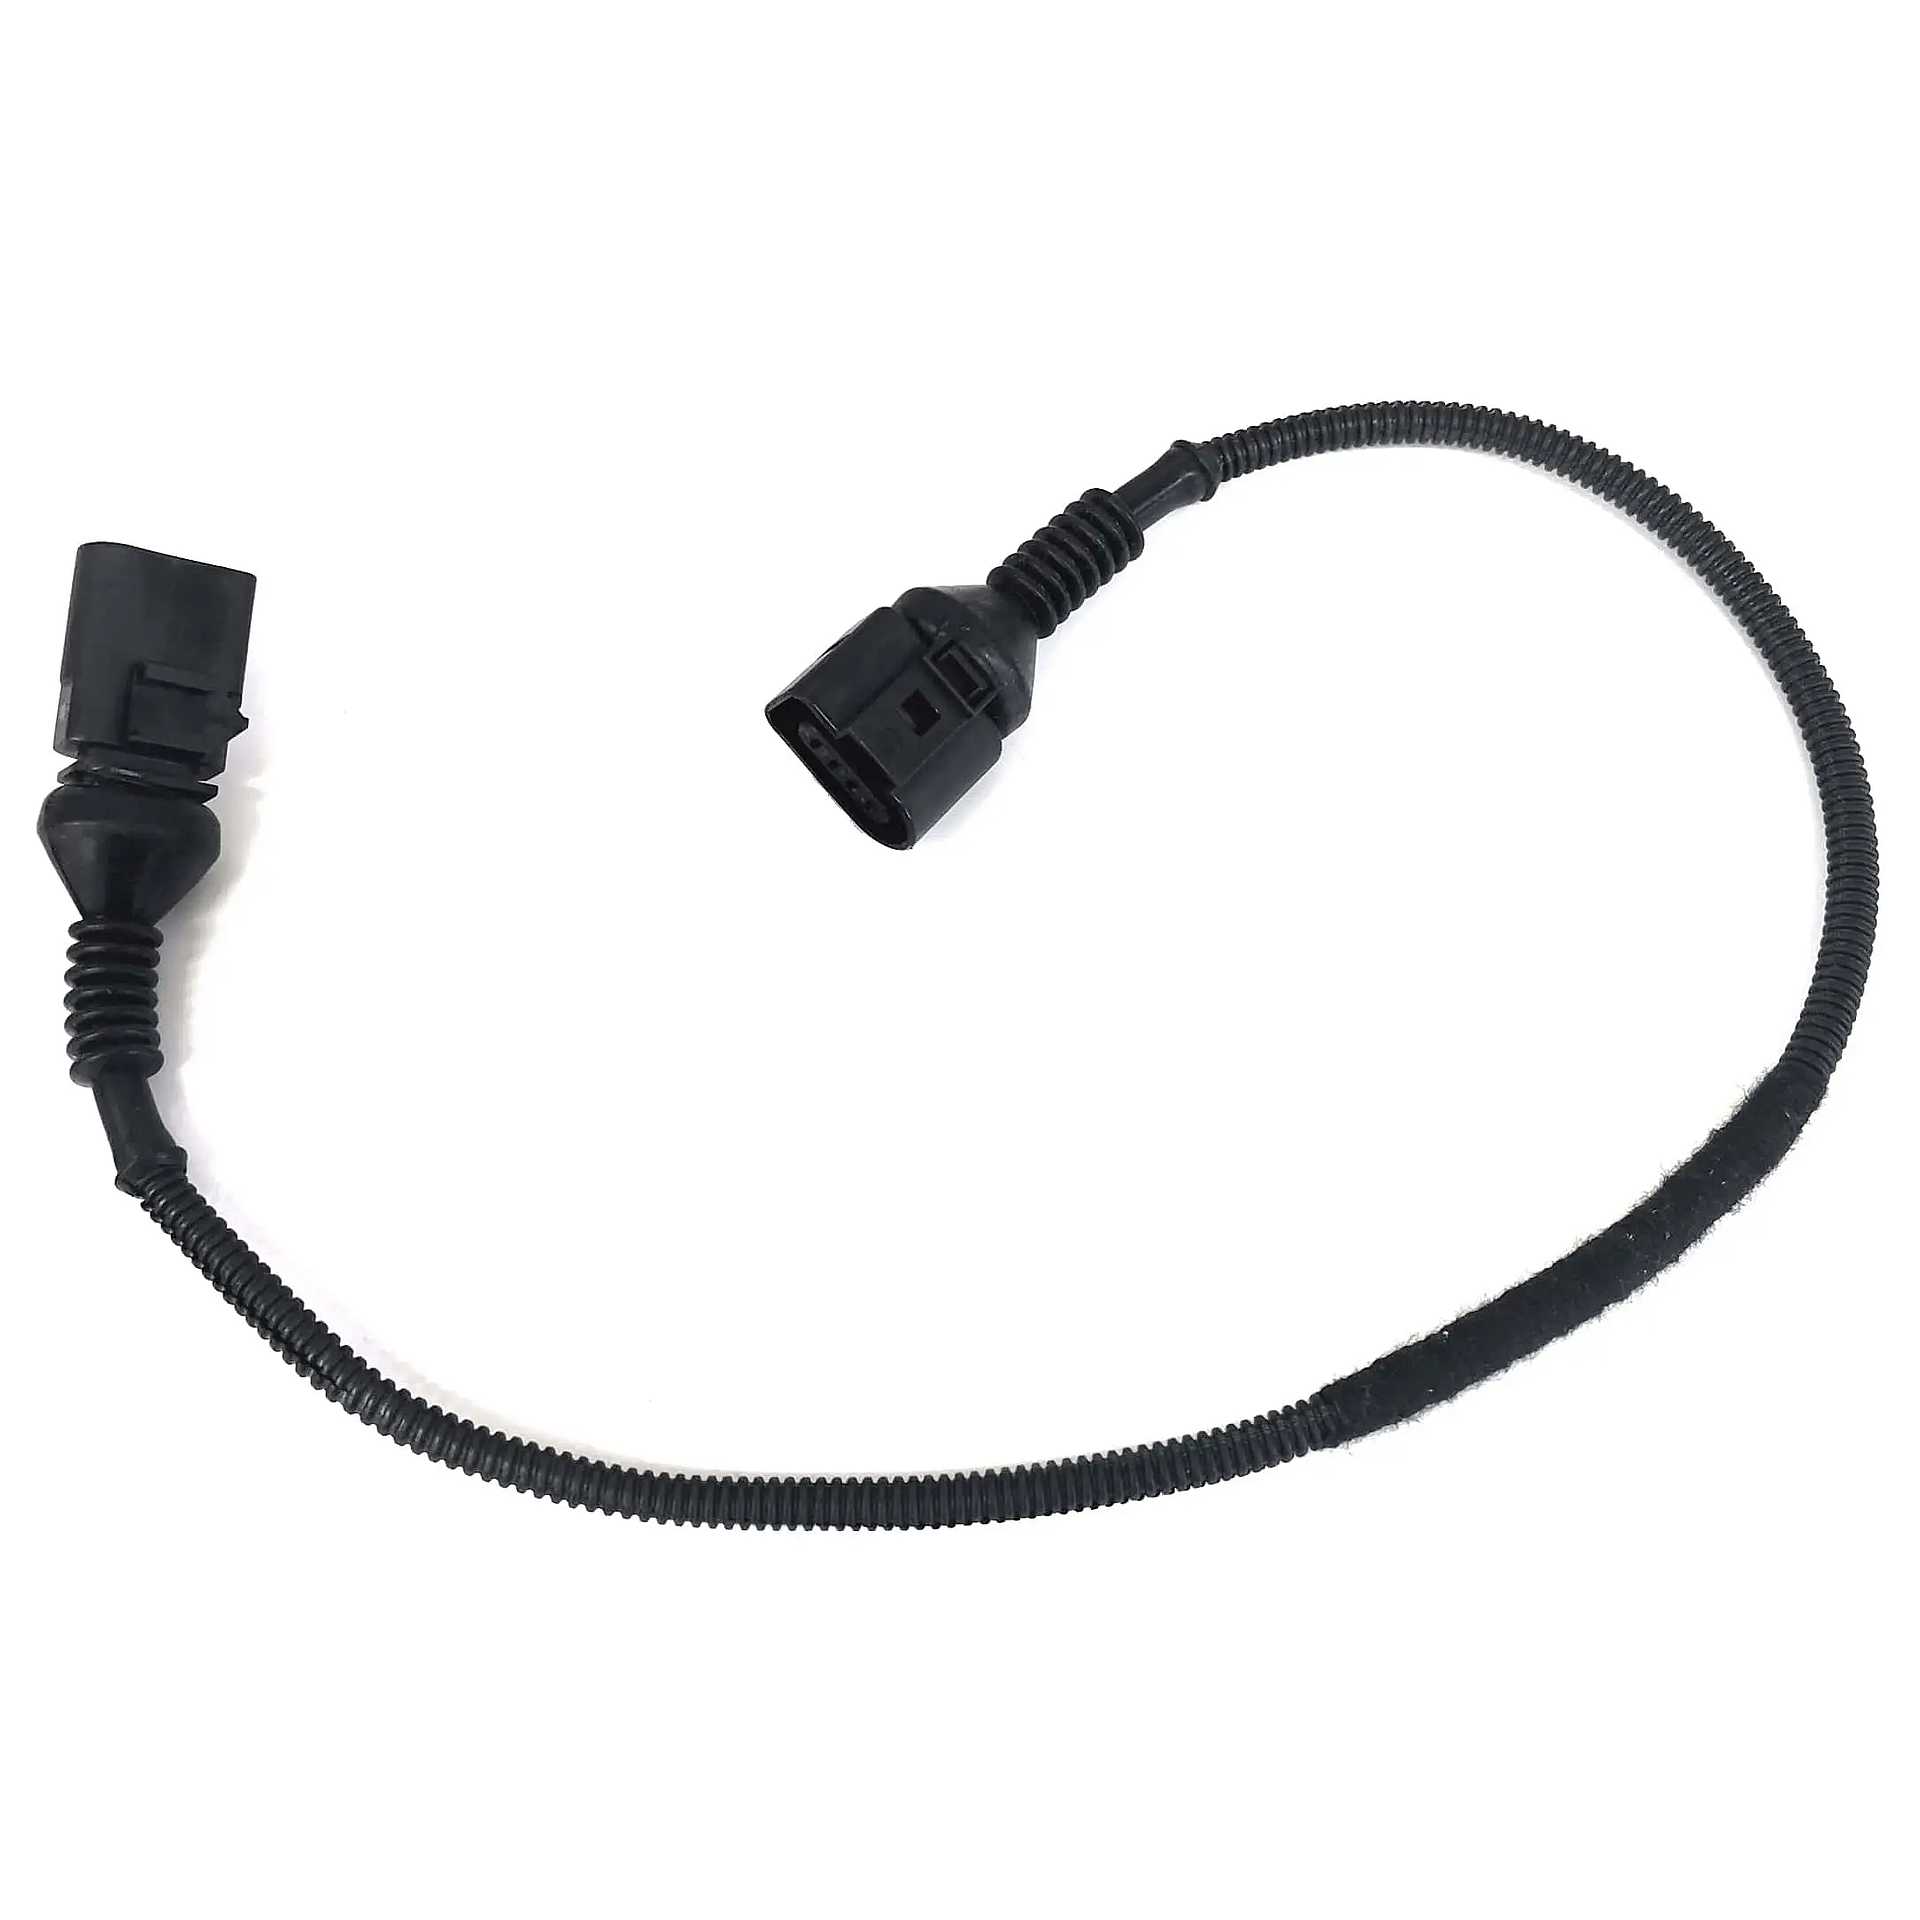 2.0L TFSI EA113 Adapter Cable for TTS Air Mass Meter